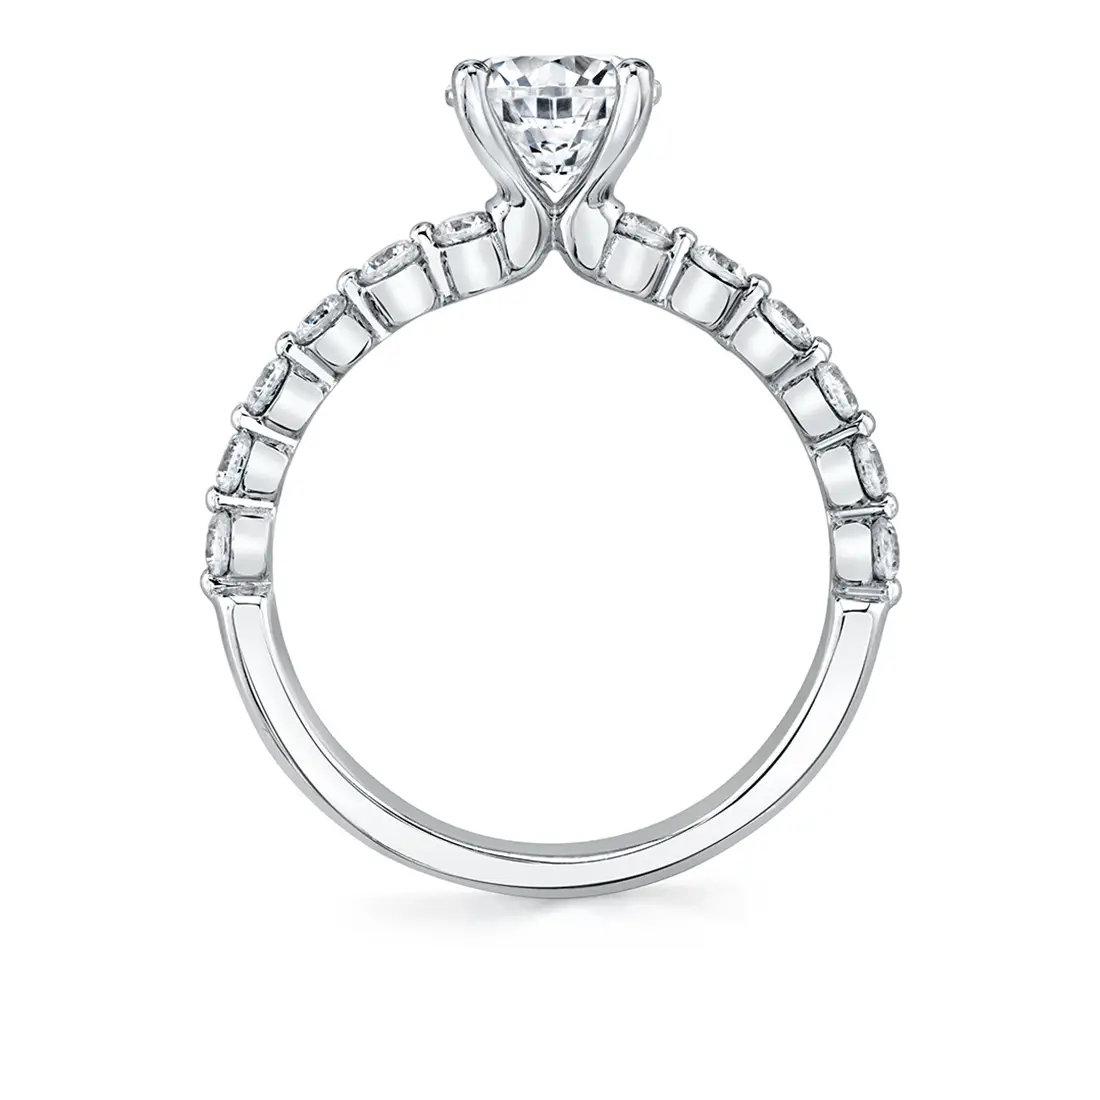 Profile Image of a Delicate Engagement Ring in White Gold - Ivanna